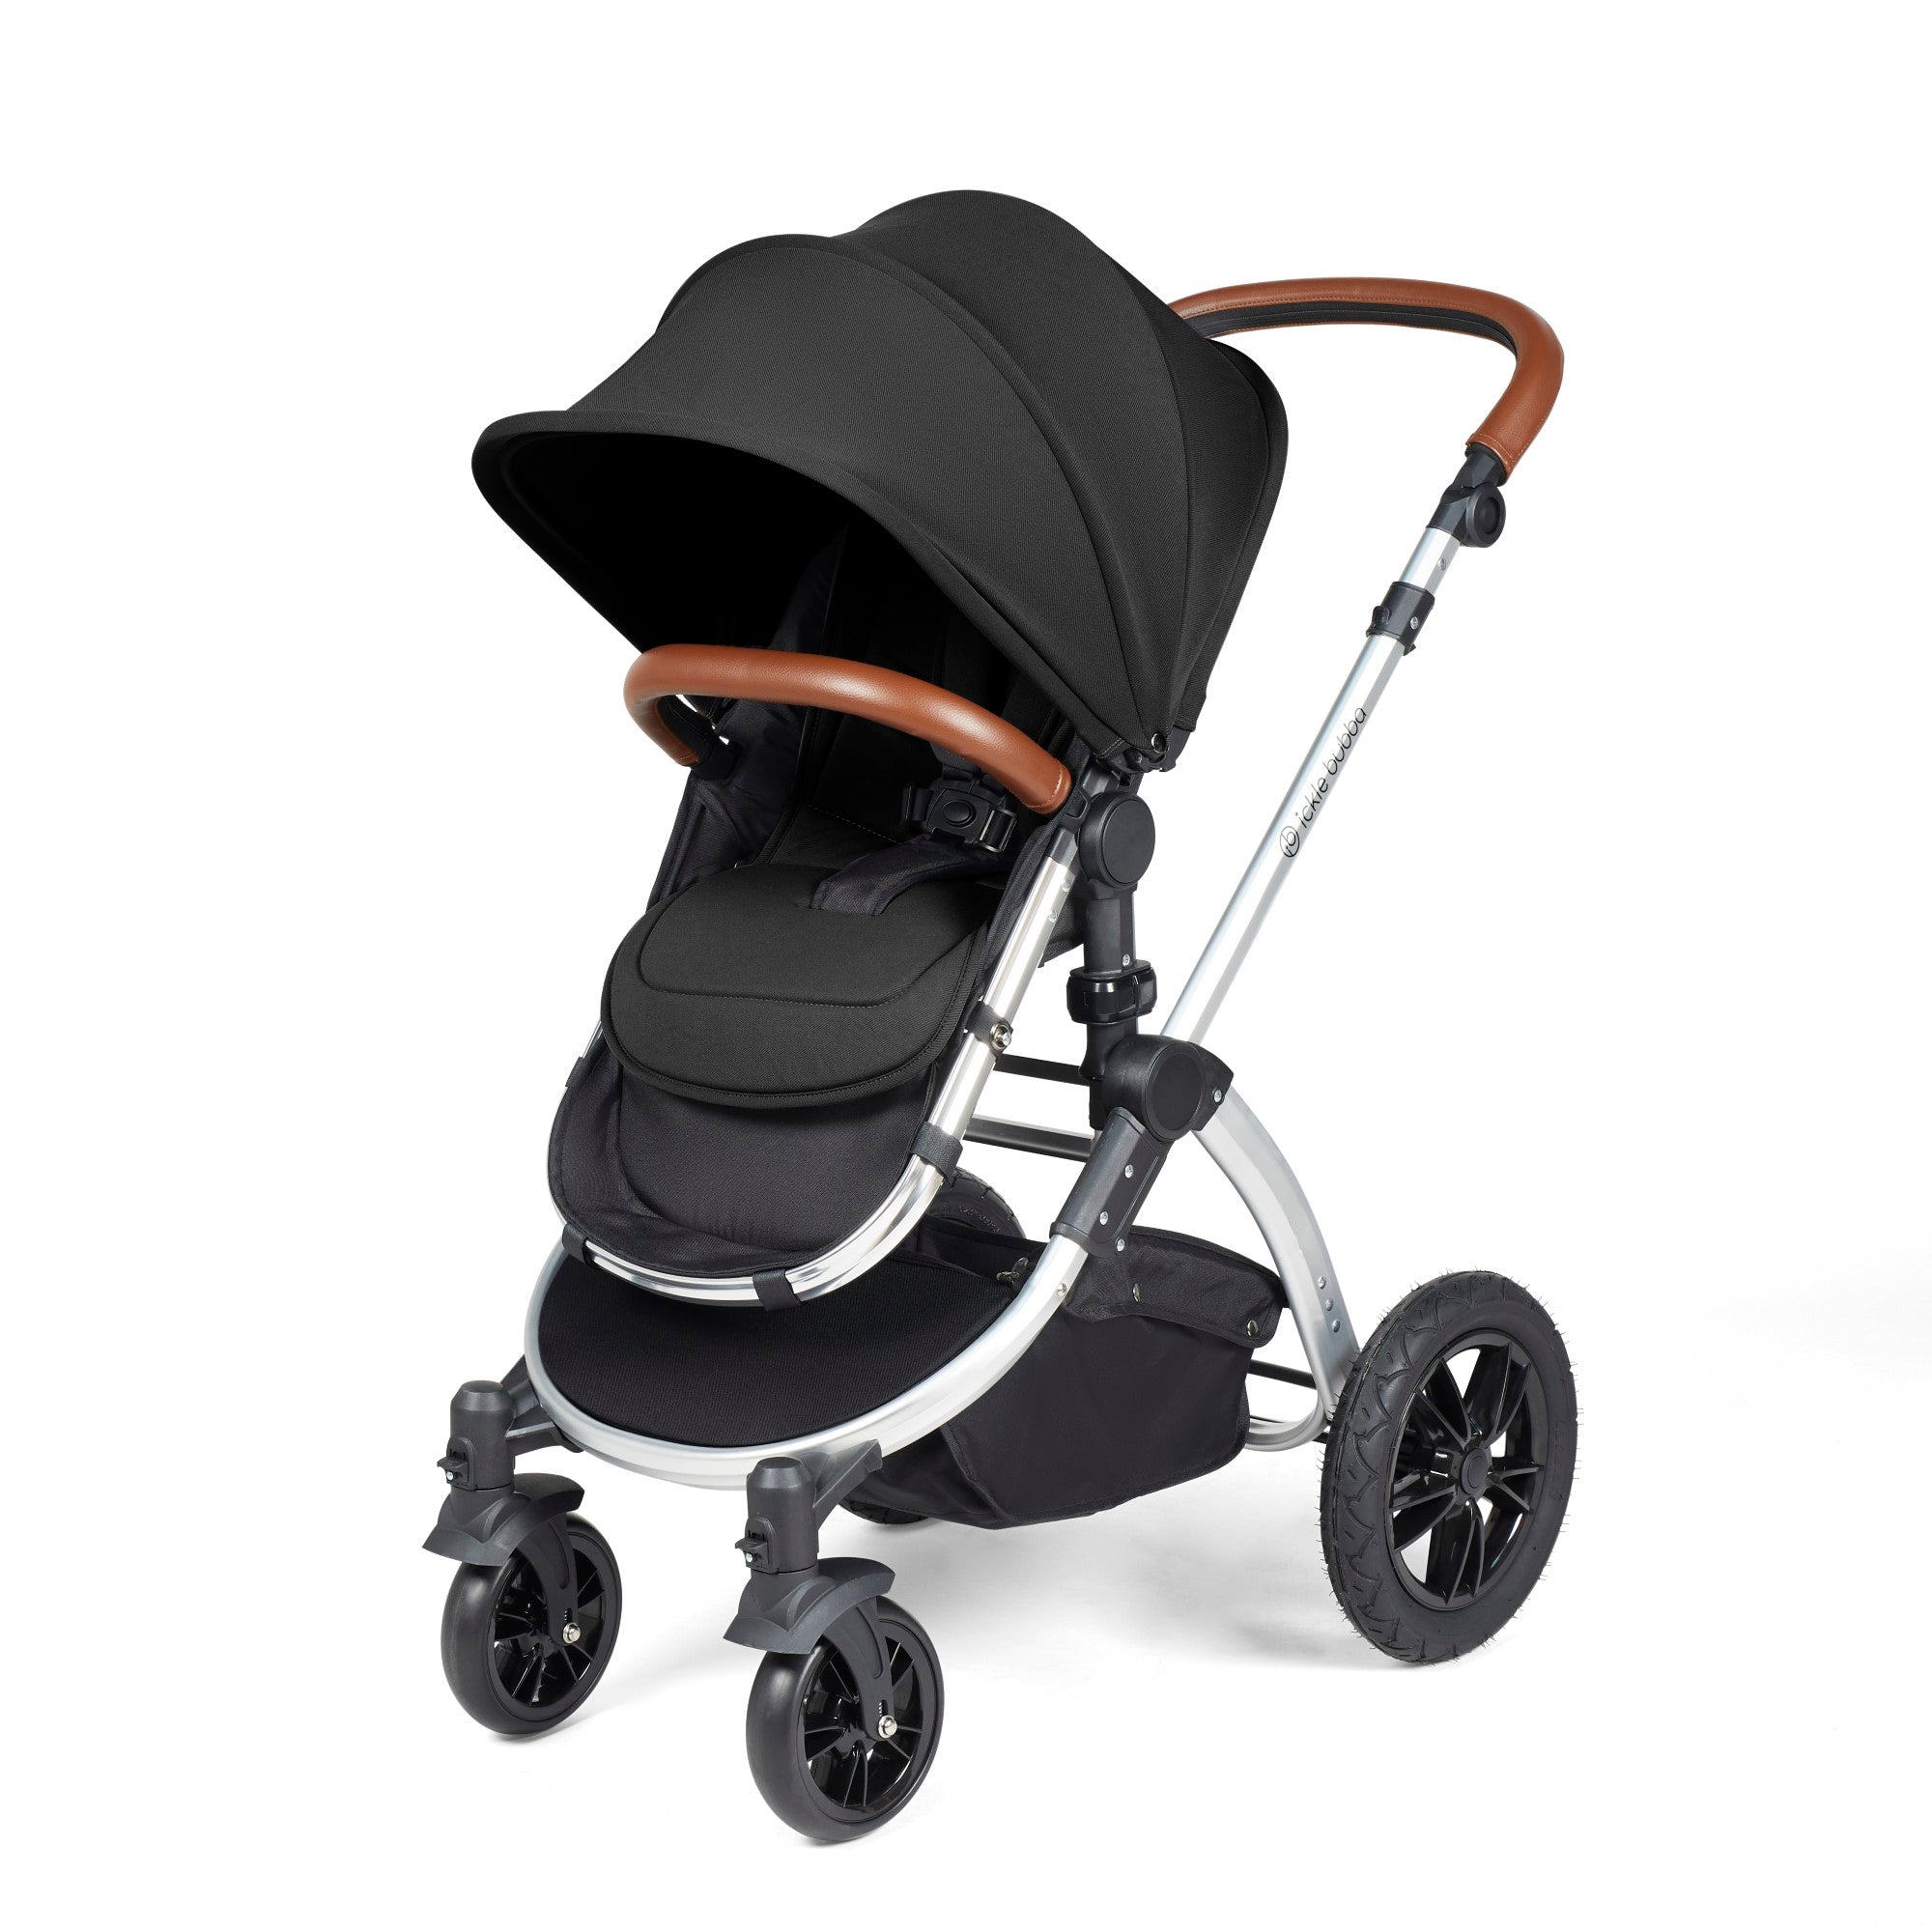 Ickle Bubba Stomp Luxe 3in1 Desert/Black - Choose your handle